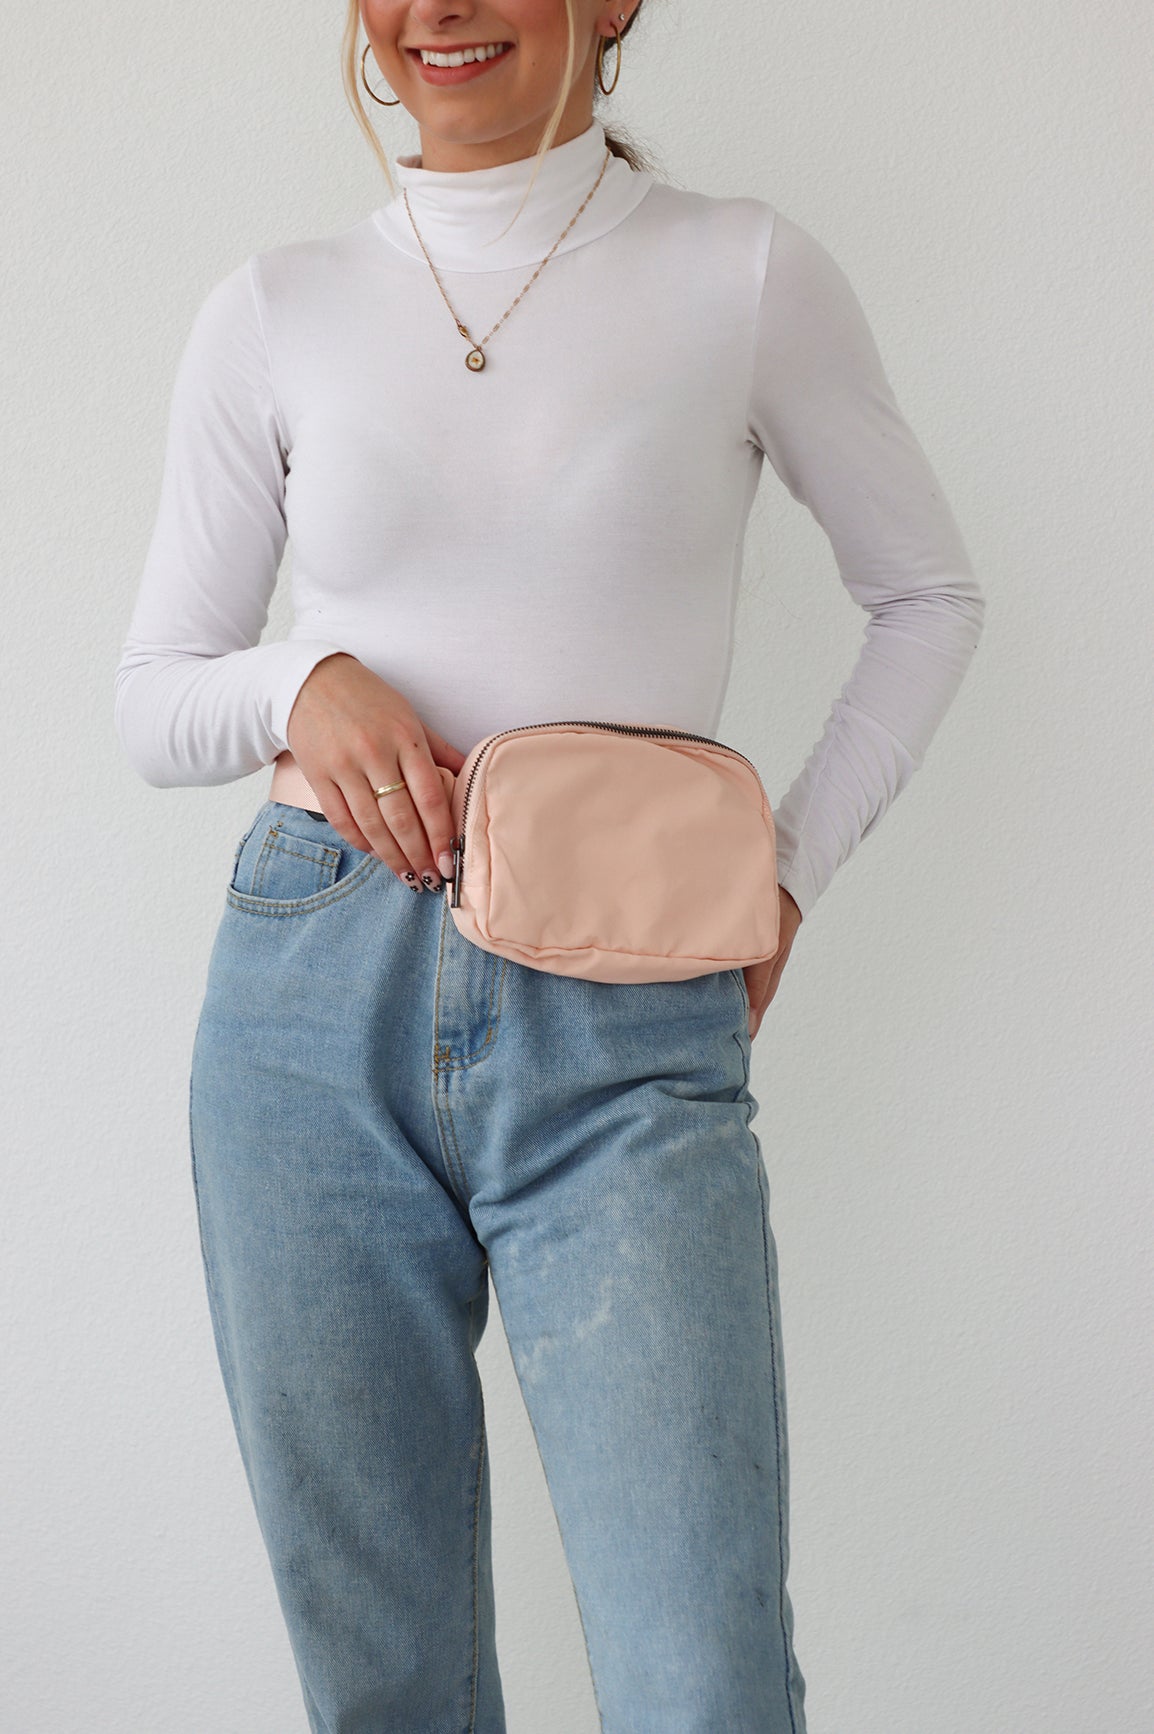 Are Necklace Bags the New Fanny Pack?